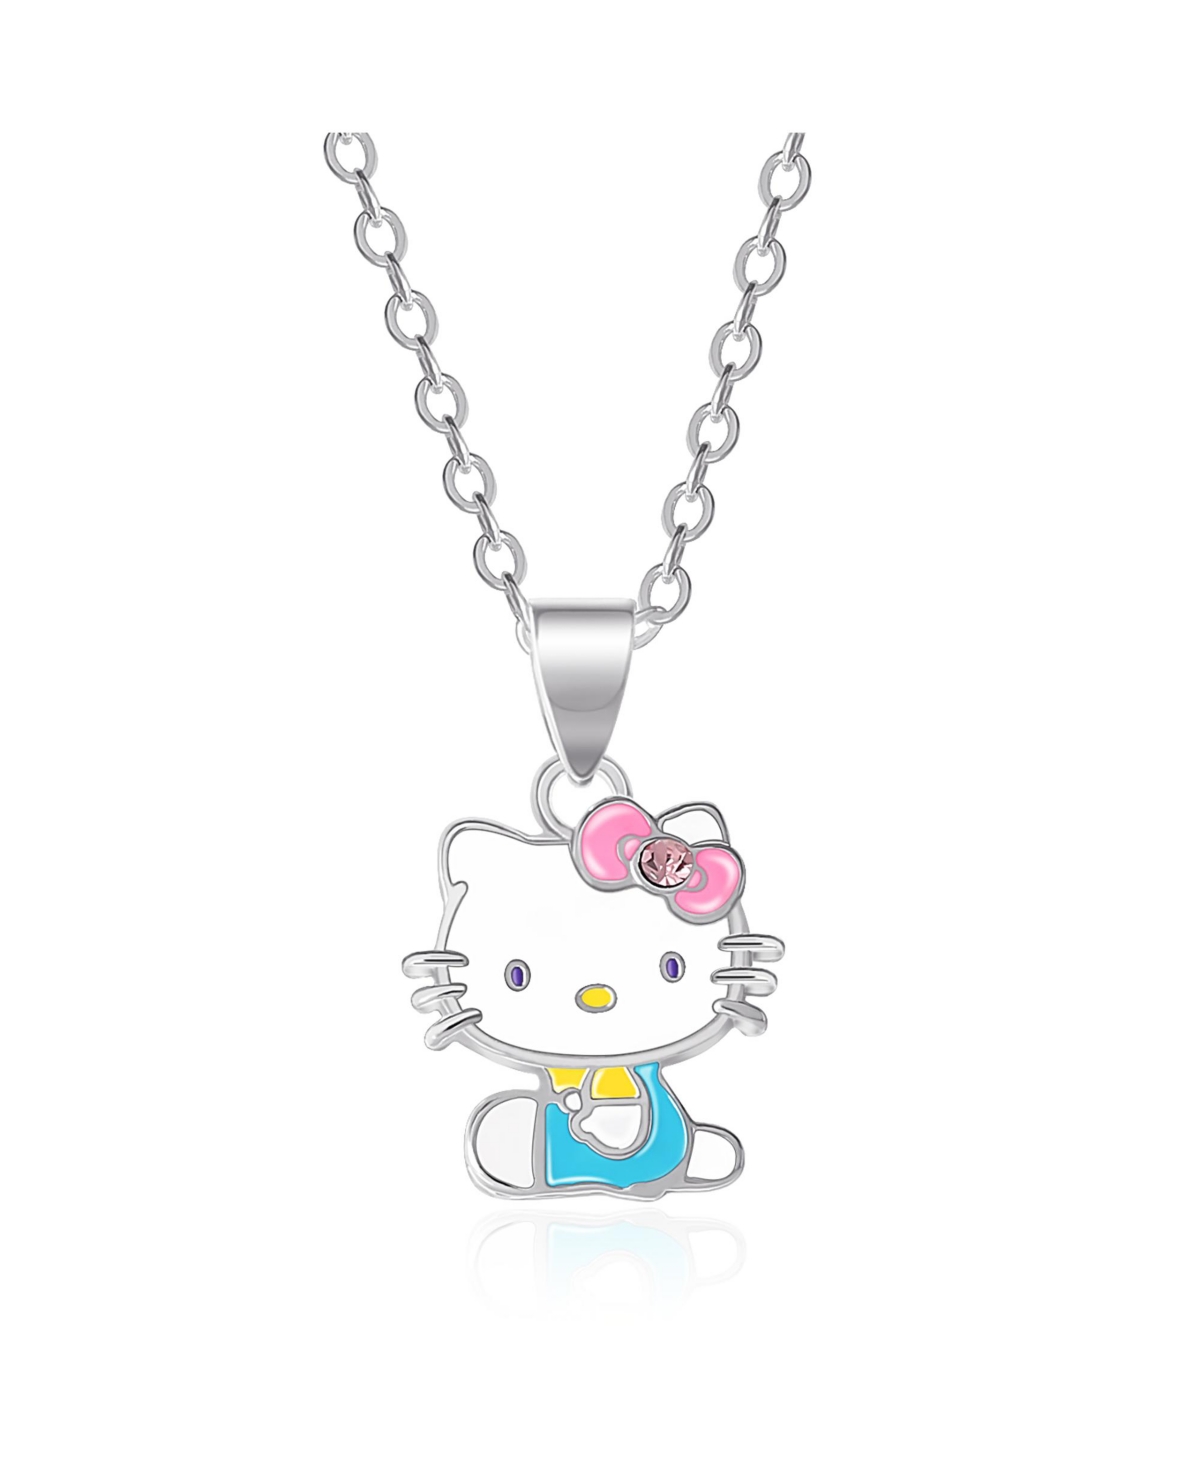 Sanrio Silver Plated Enamel Seated Necklace - 18'' Chain, Officially Licensed Authentic - White, blue, pink